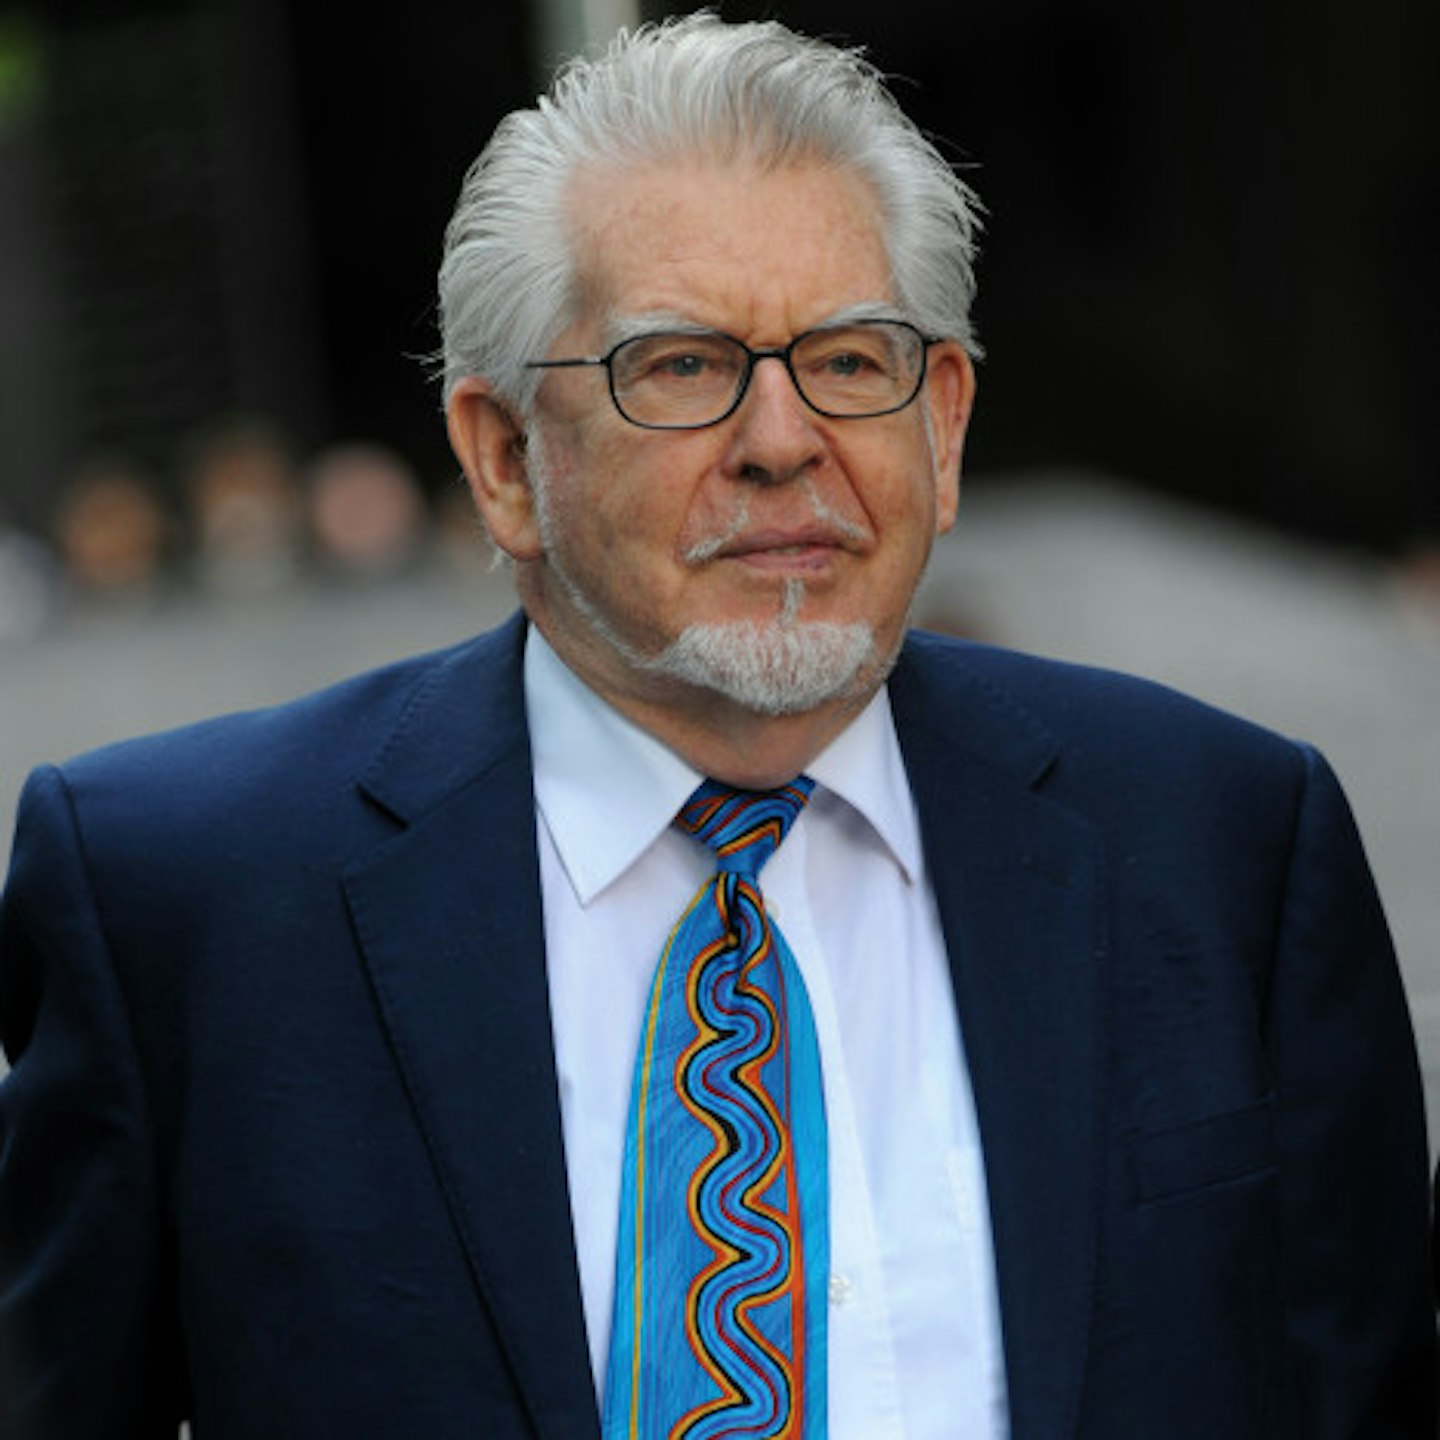 Rolf Harris denies abusing the girl but admits having a sexual relationship with her after she turned 18